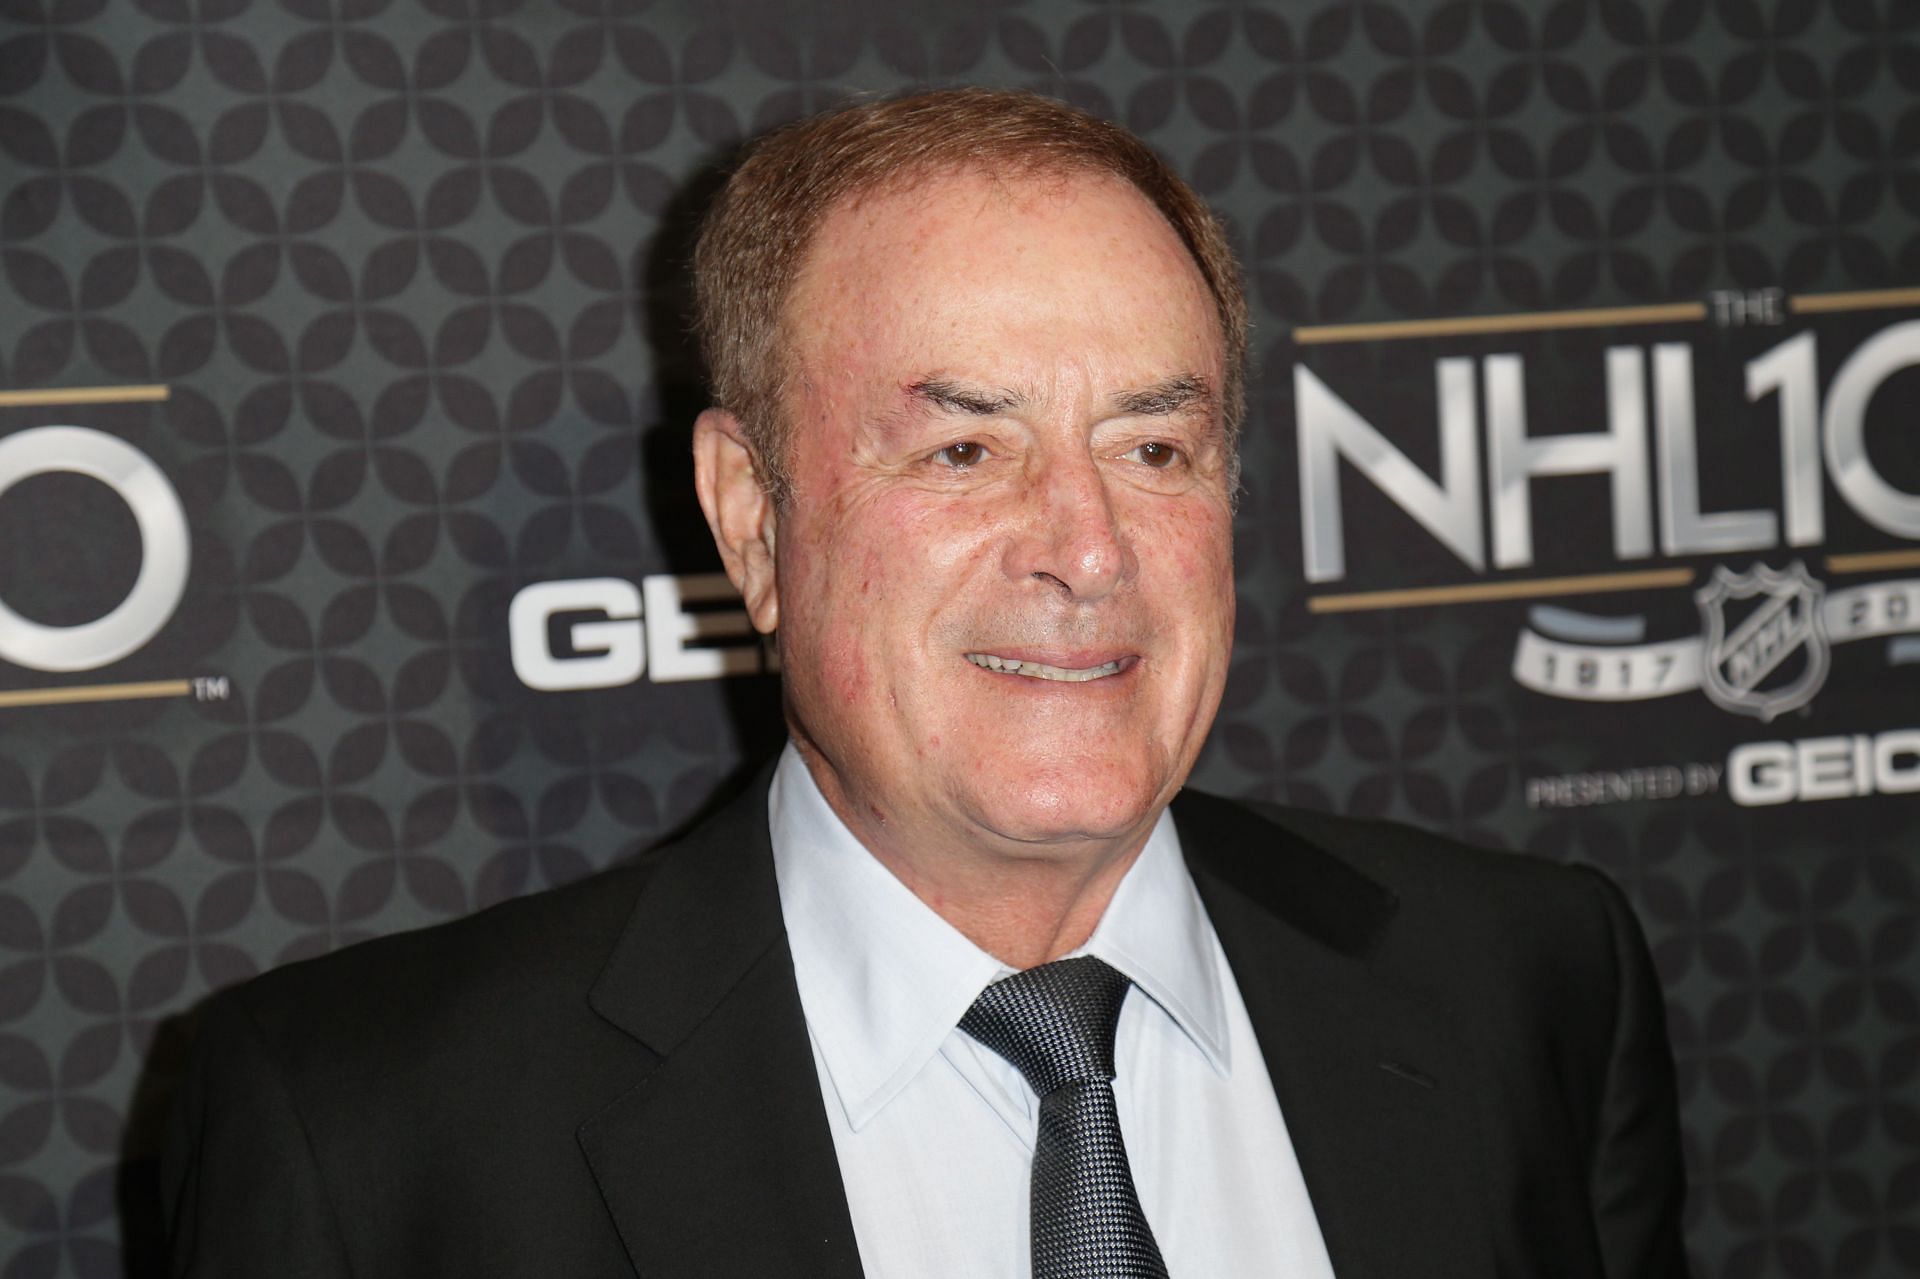 Al Michaels at The NHL 100 presented by GEICO - Red Carpet